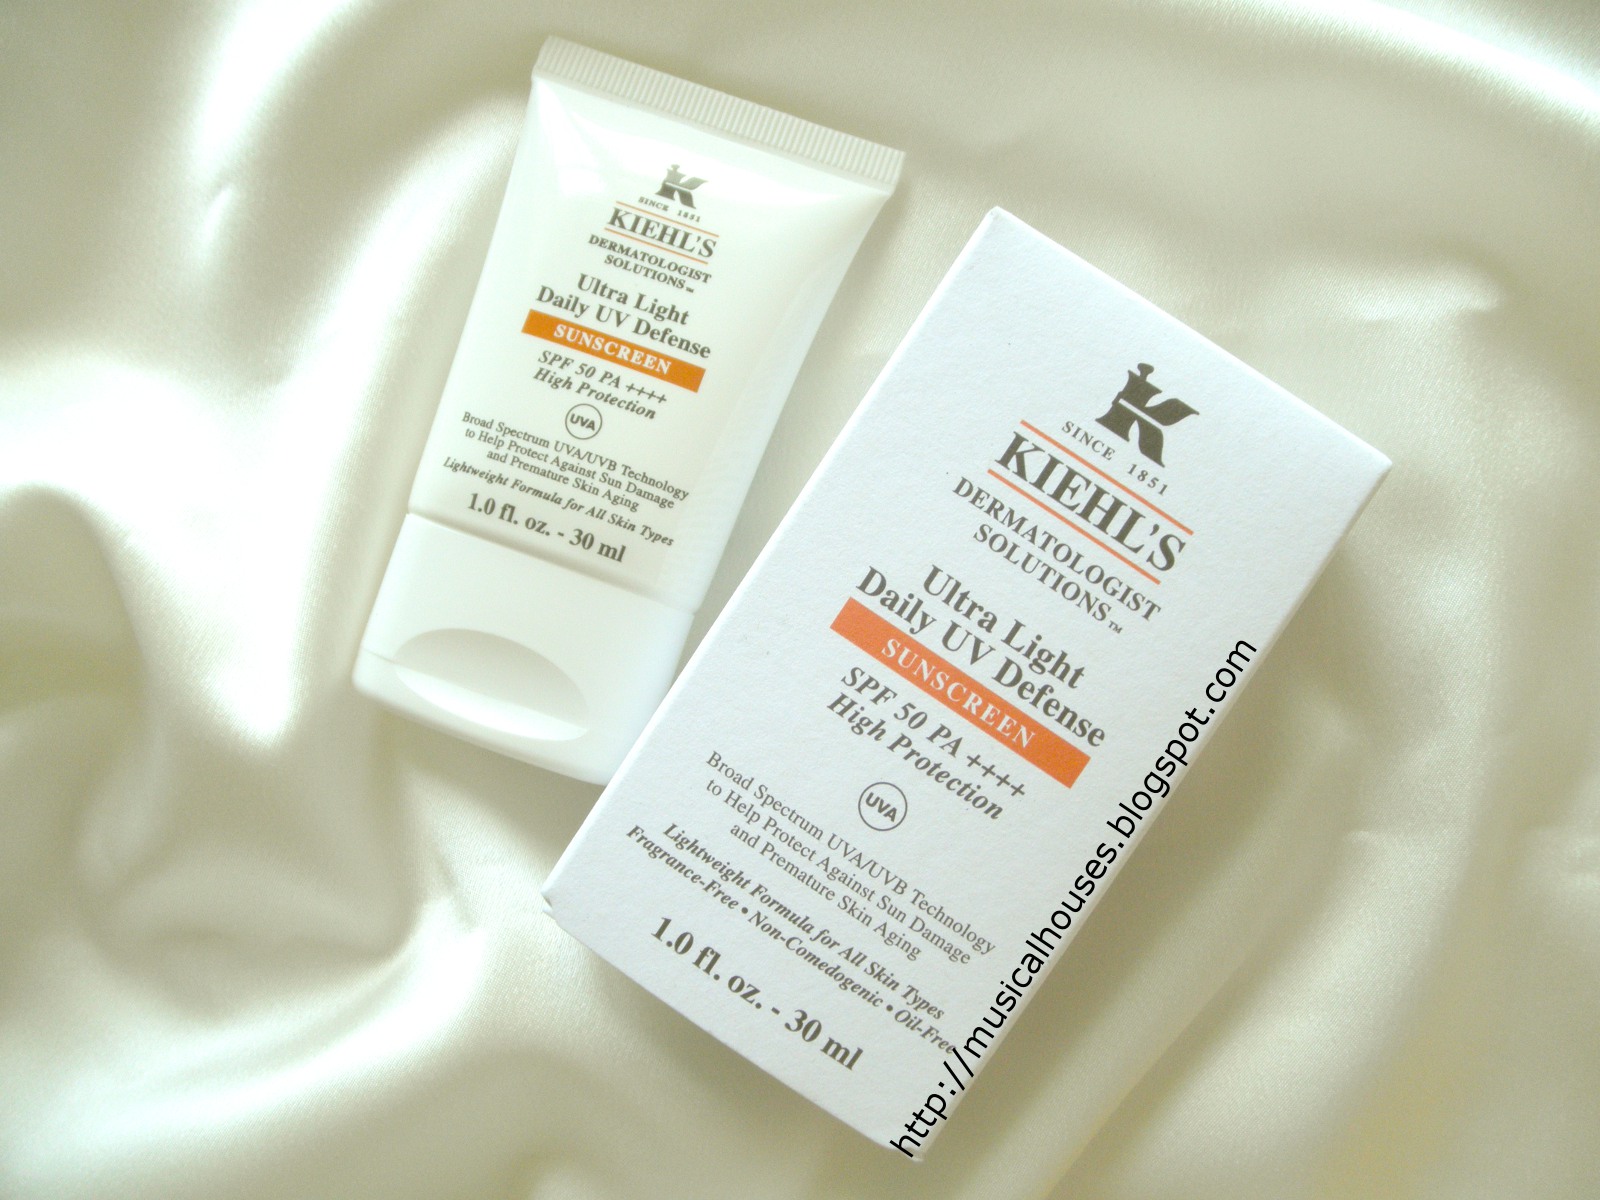 Kiehl's Ultra Light Daily UV Defense Review and Ingredients Analysis (Reformulated Version) - of and Fingers